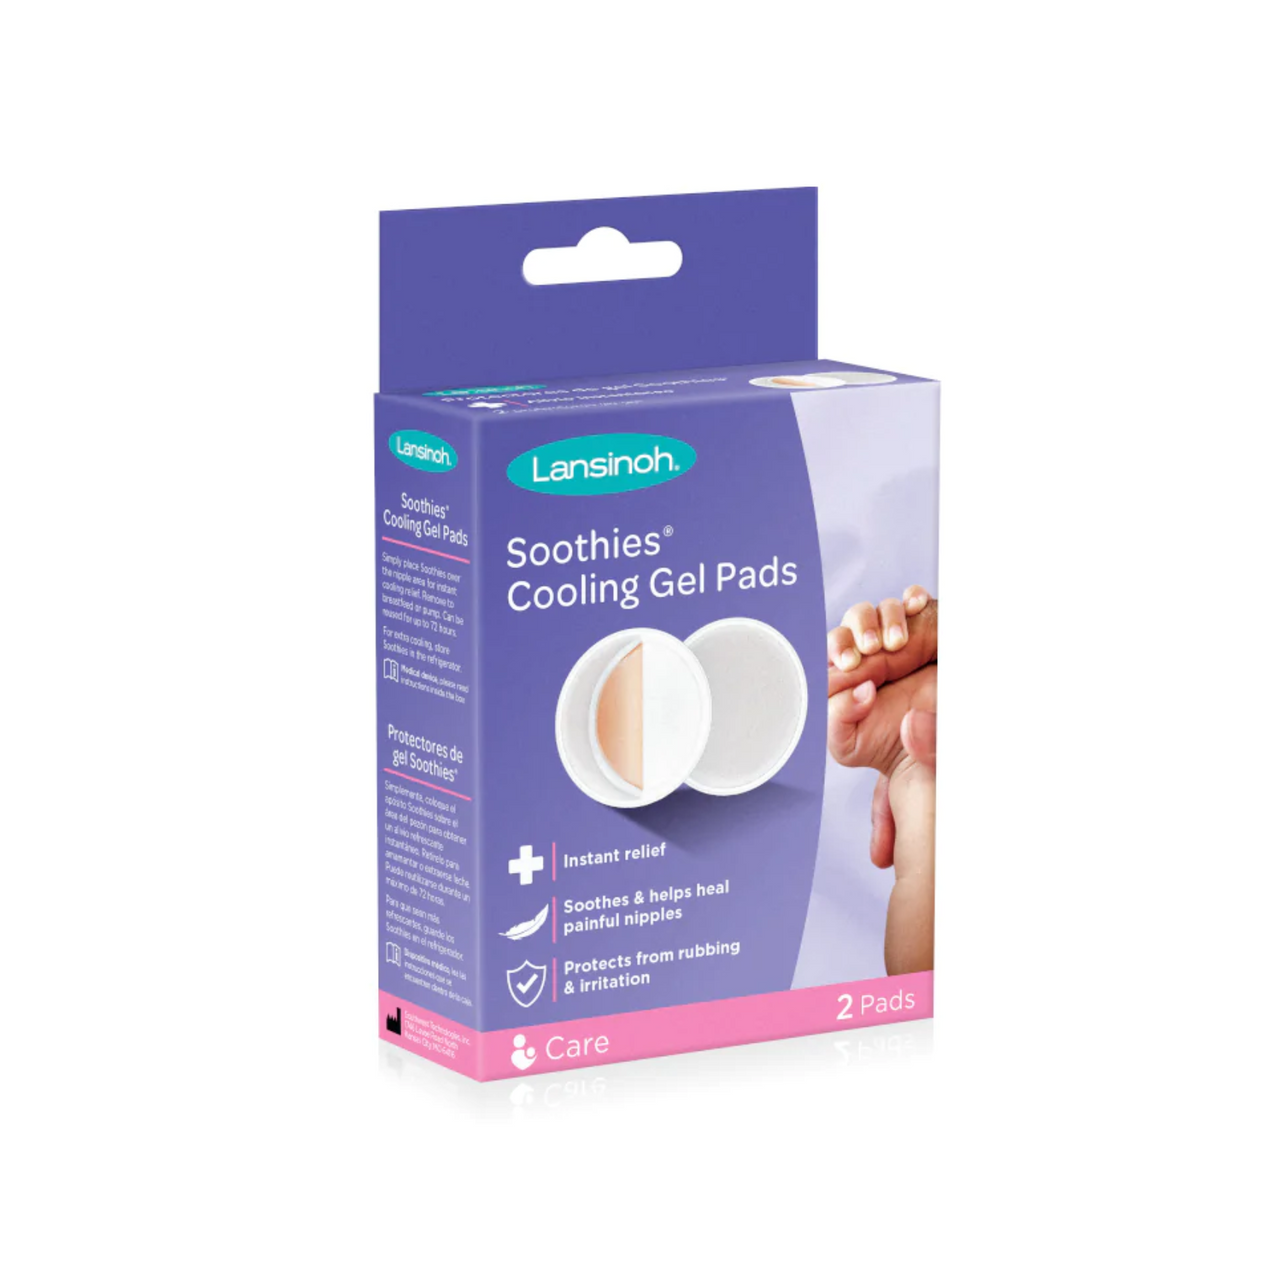 Lansinoh Soothies Gel Pads for Breastfeeding 2 Count